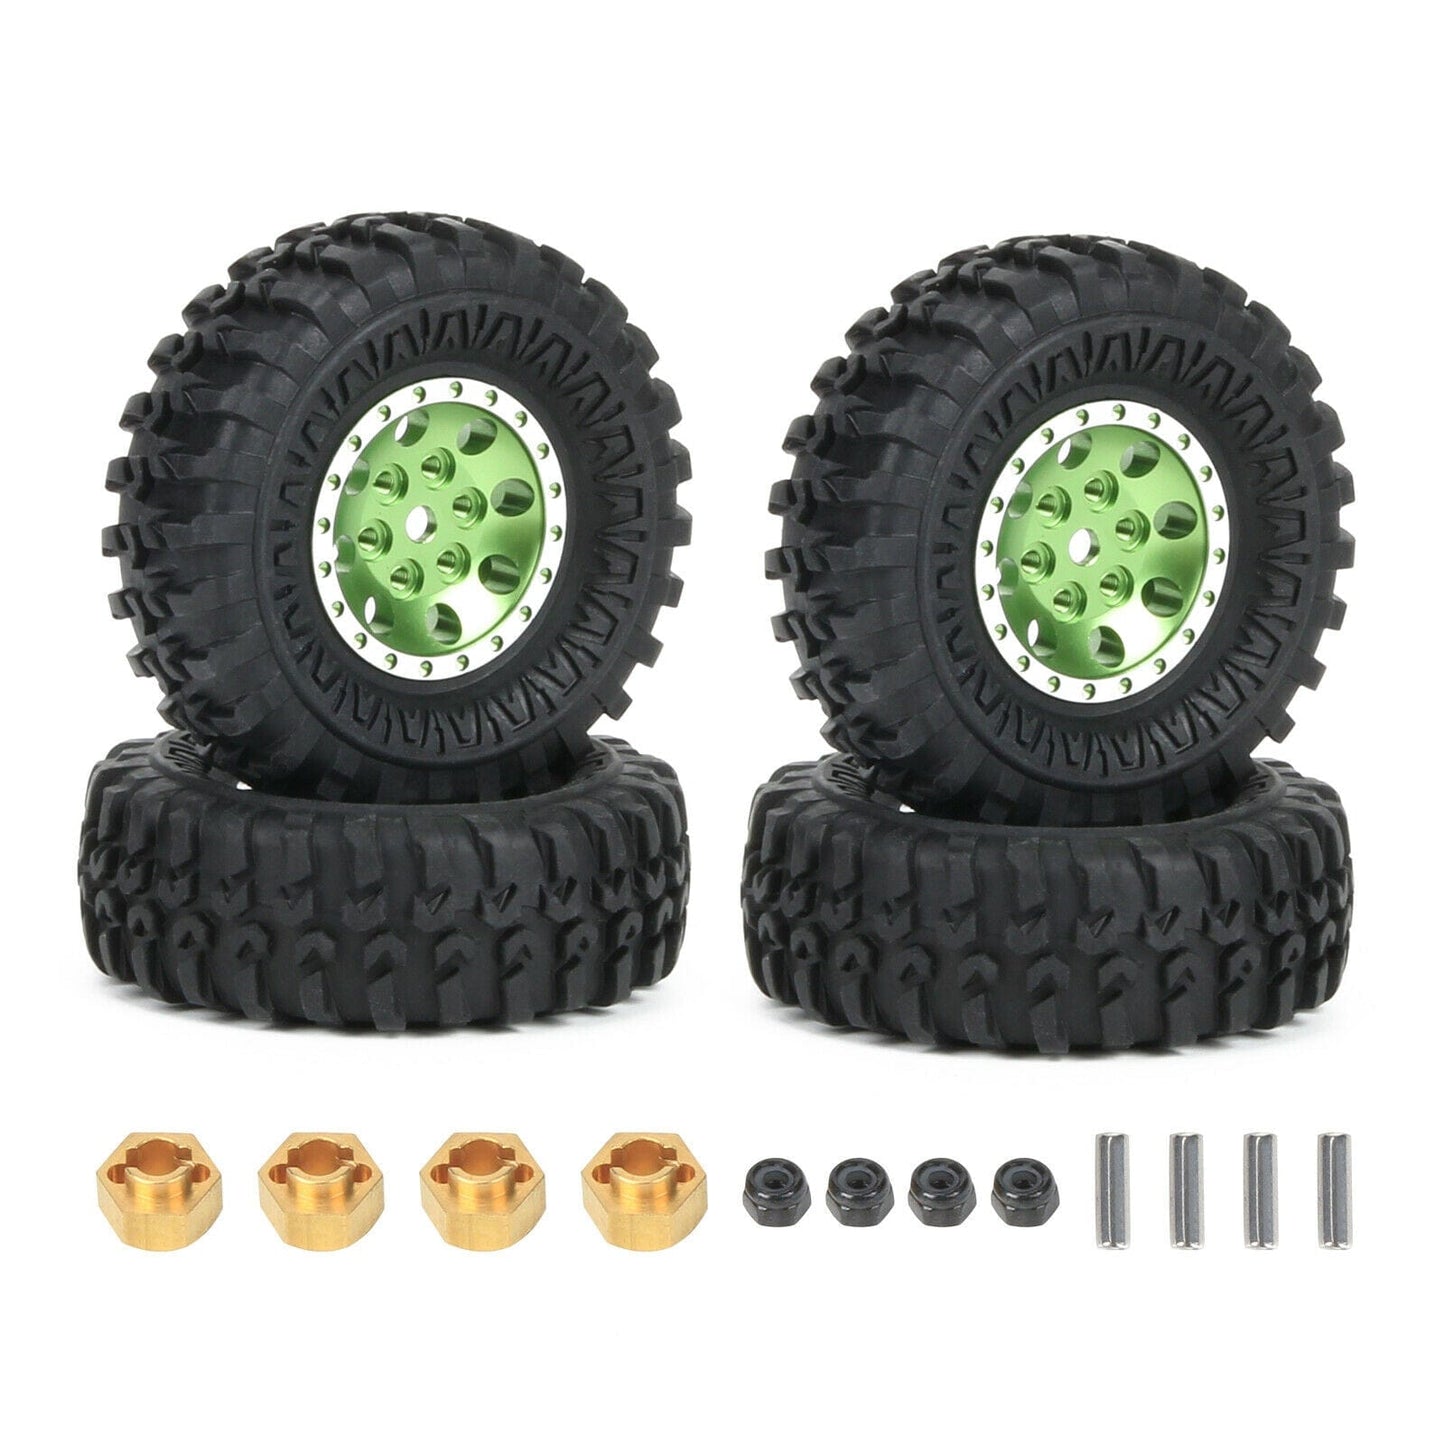 RCAWD 4pcs 55*20mm Wheel Rubber Tire for Axial 1 - 24 SCX24 Panda Tetra Etc Crawlers - RCAWD